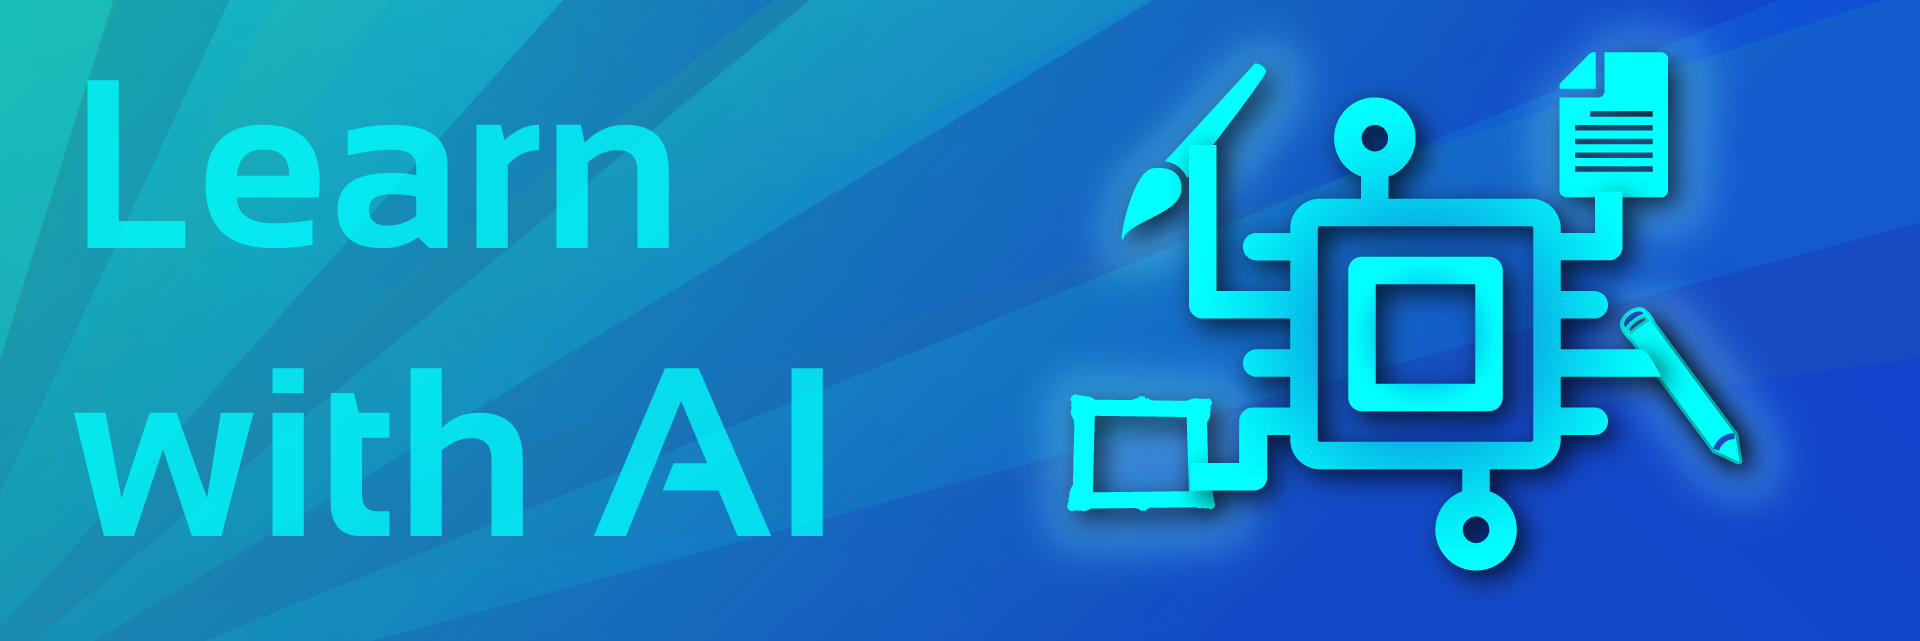 Learnwithai Graphic Banner 1080